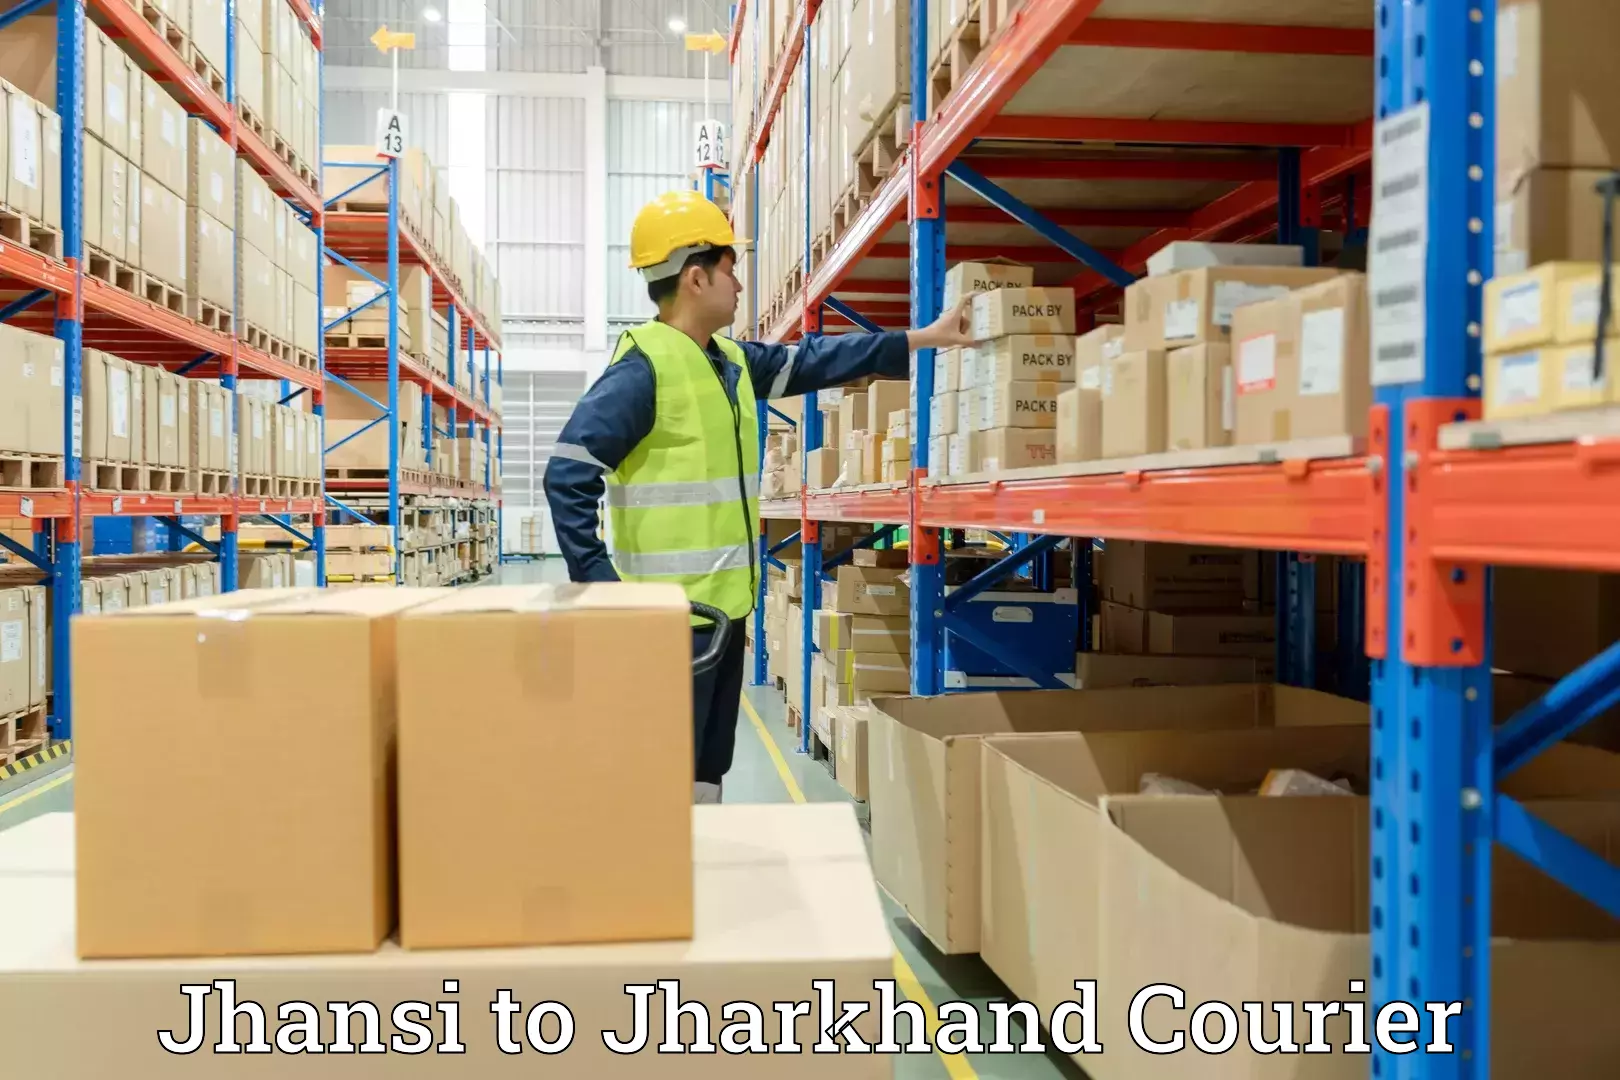 Residential moving experts Jhansi to Jharkhand